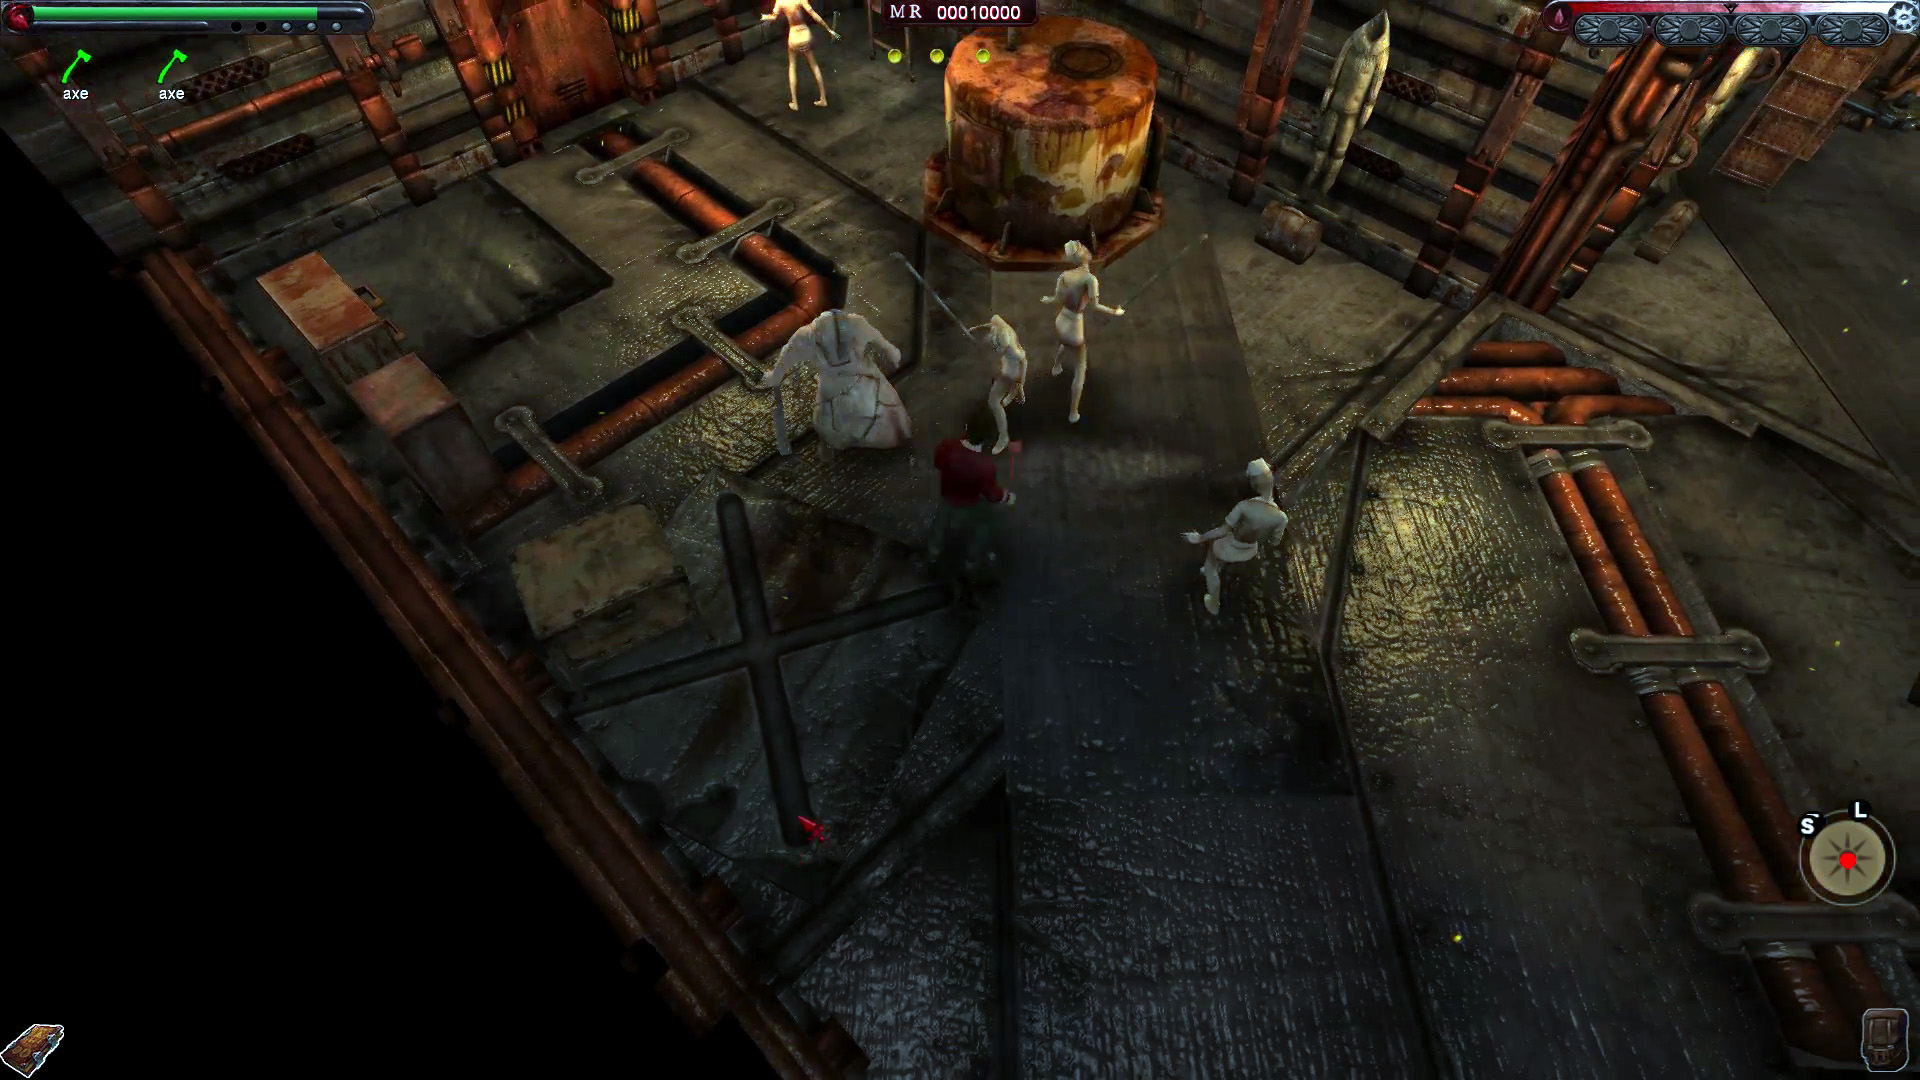 silent hill ps vita review download free